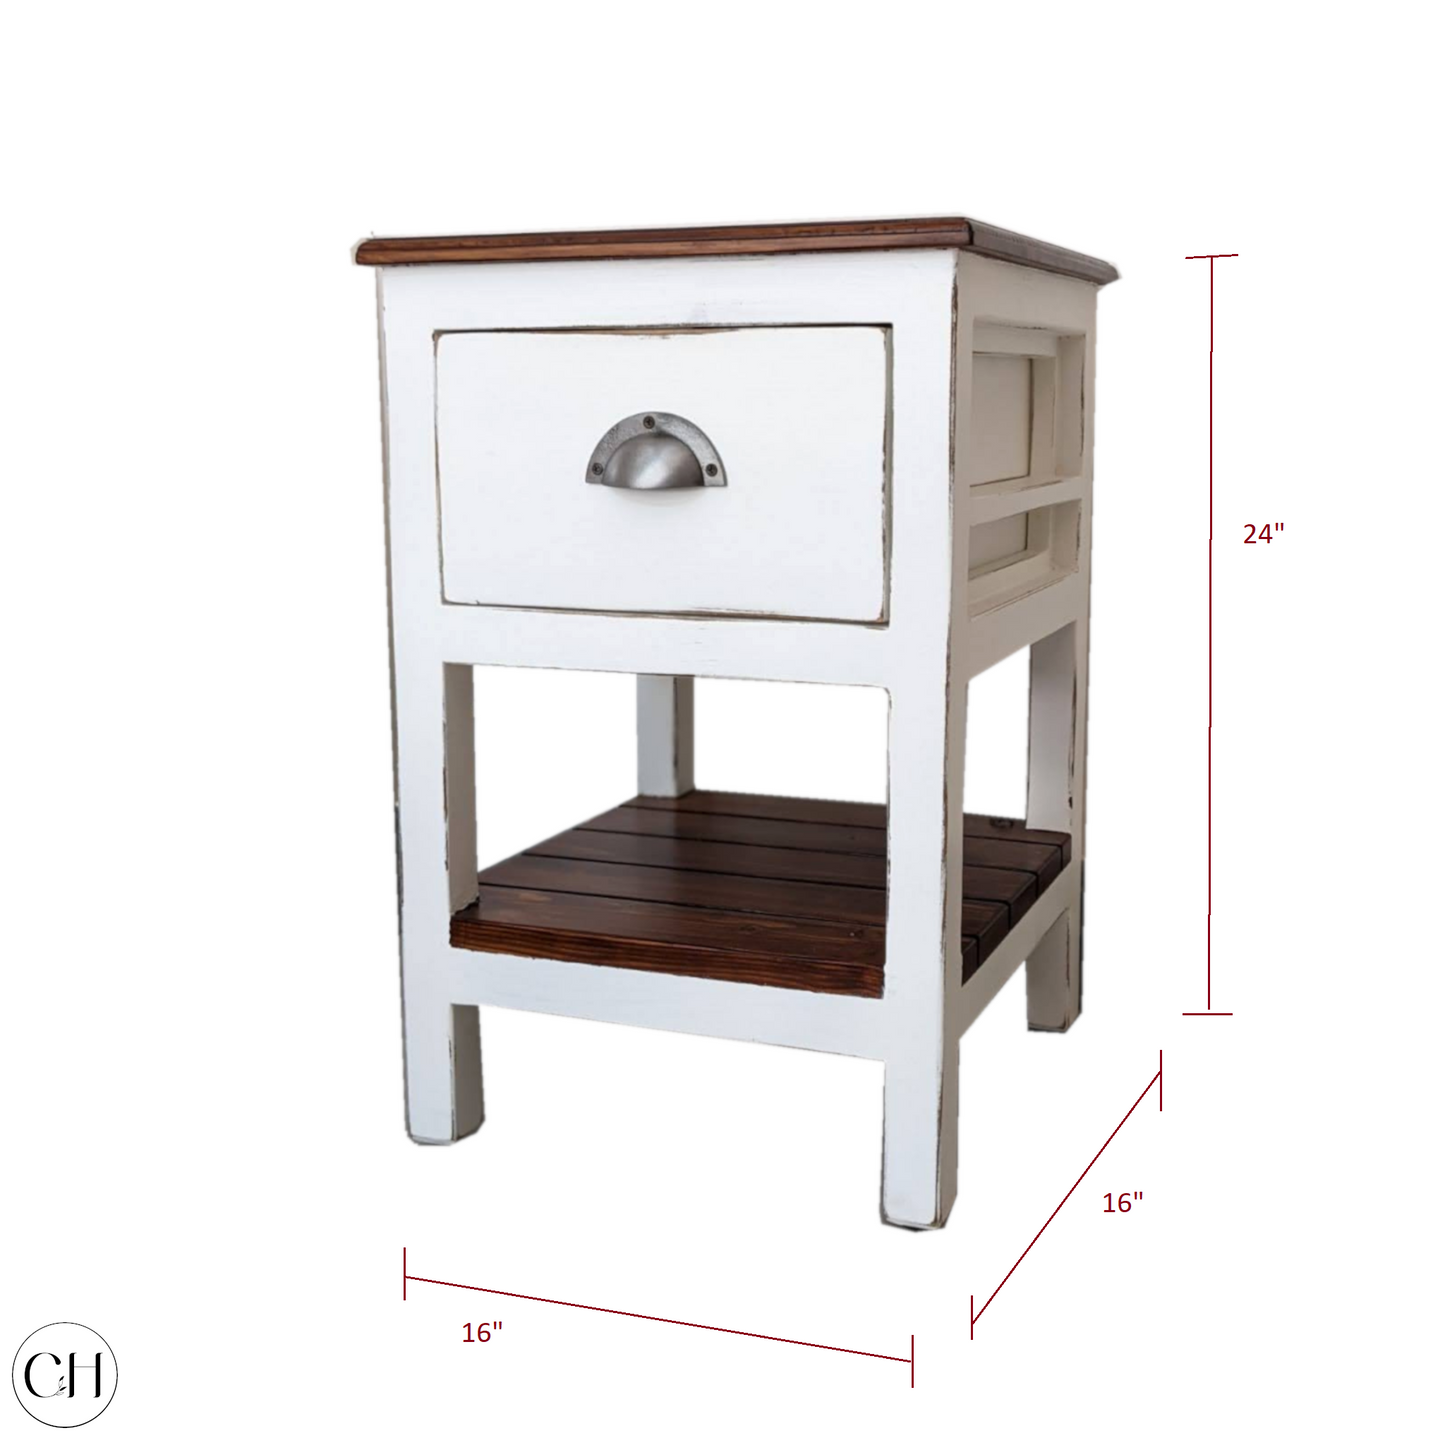 CustHum-Devon-farmhouse style side table in two-tone finish, distressed white and wood (dimensions)